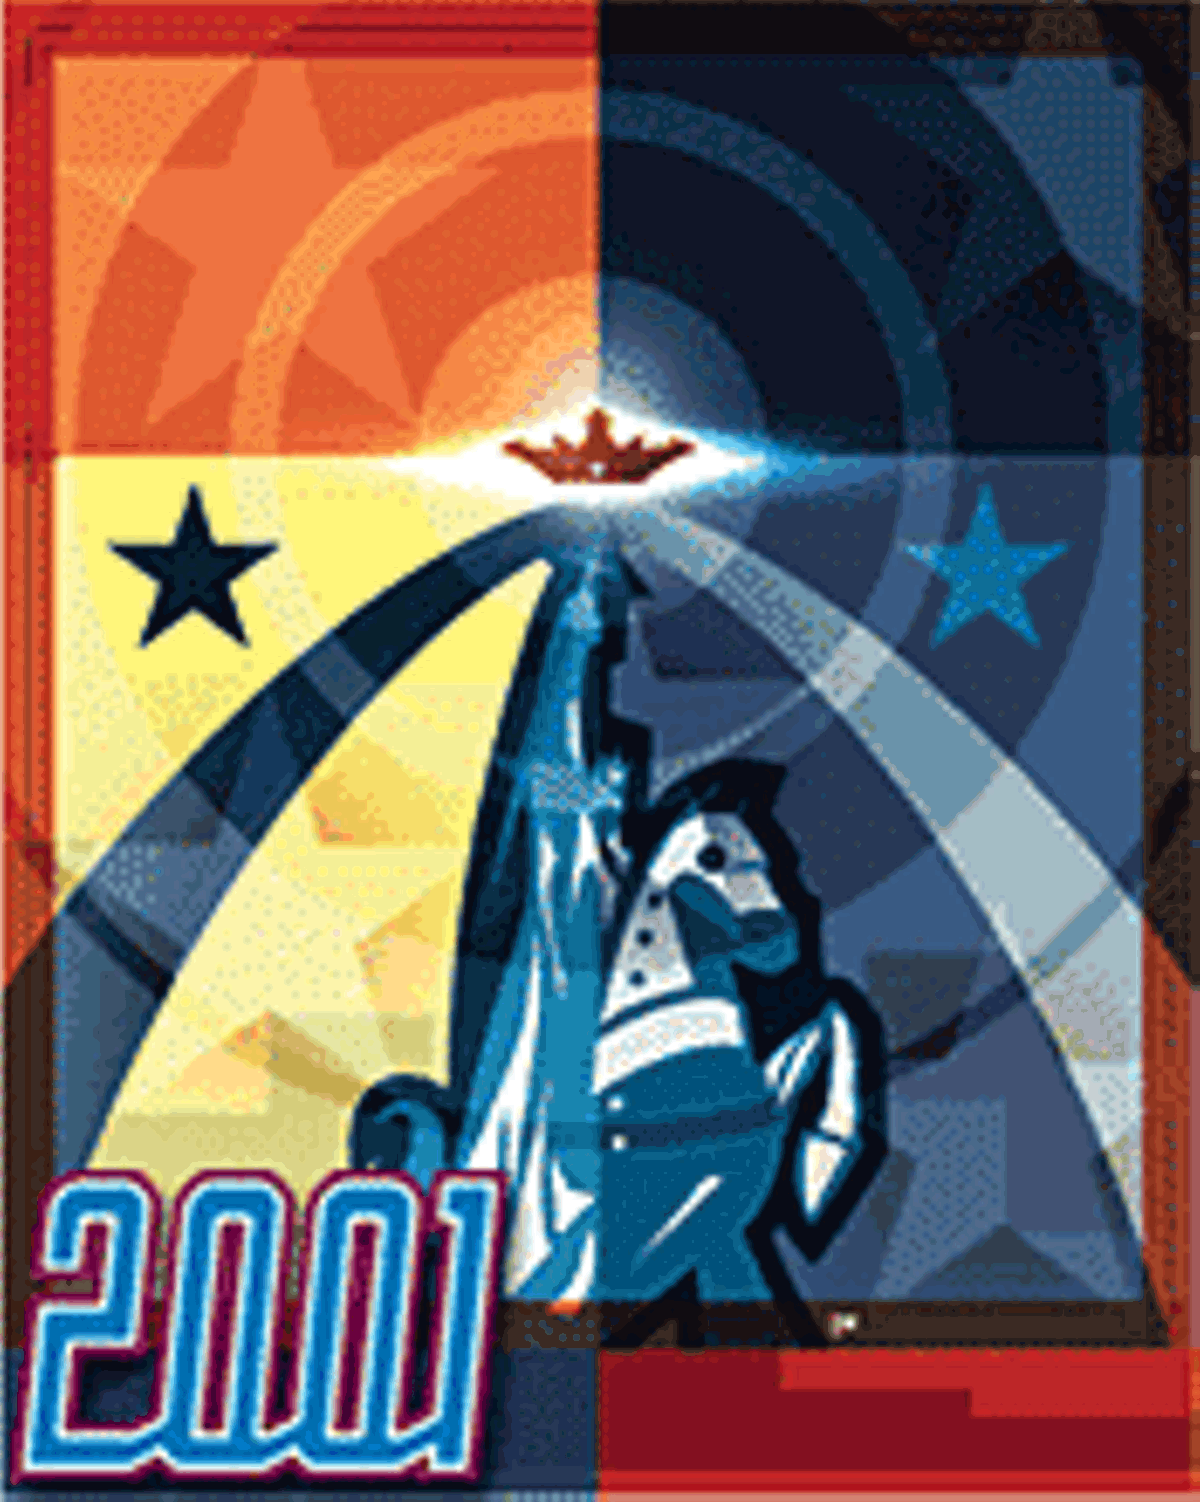 Best of St. Louis 2001 Issue Cover